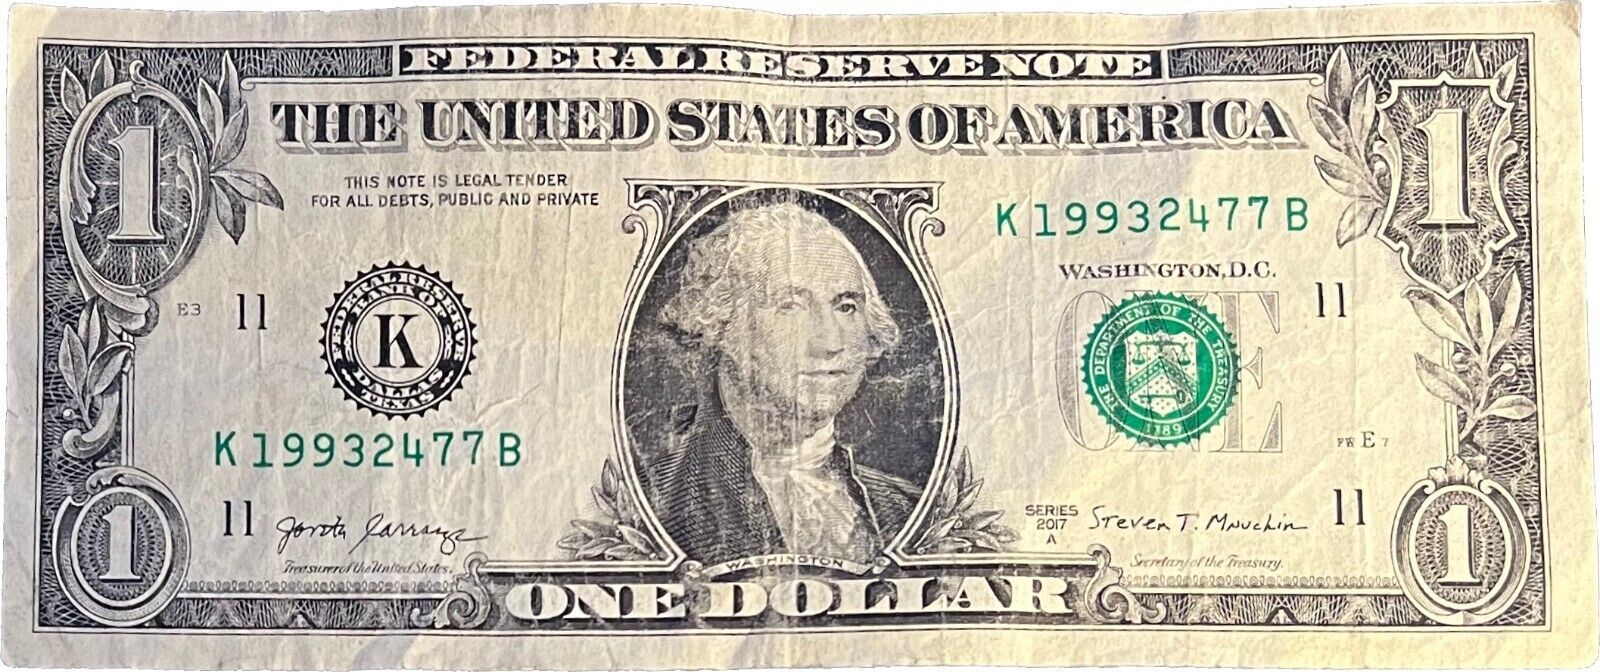 Primary image for $1 One Dollar Bill 19932477 birthday / anniversary April 2, 1993